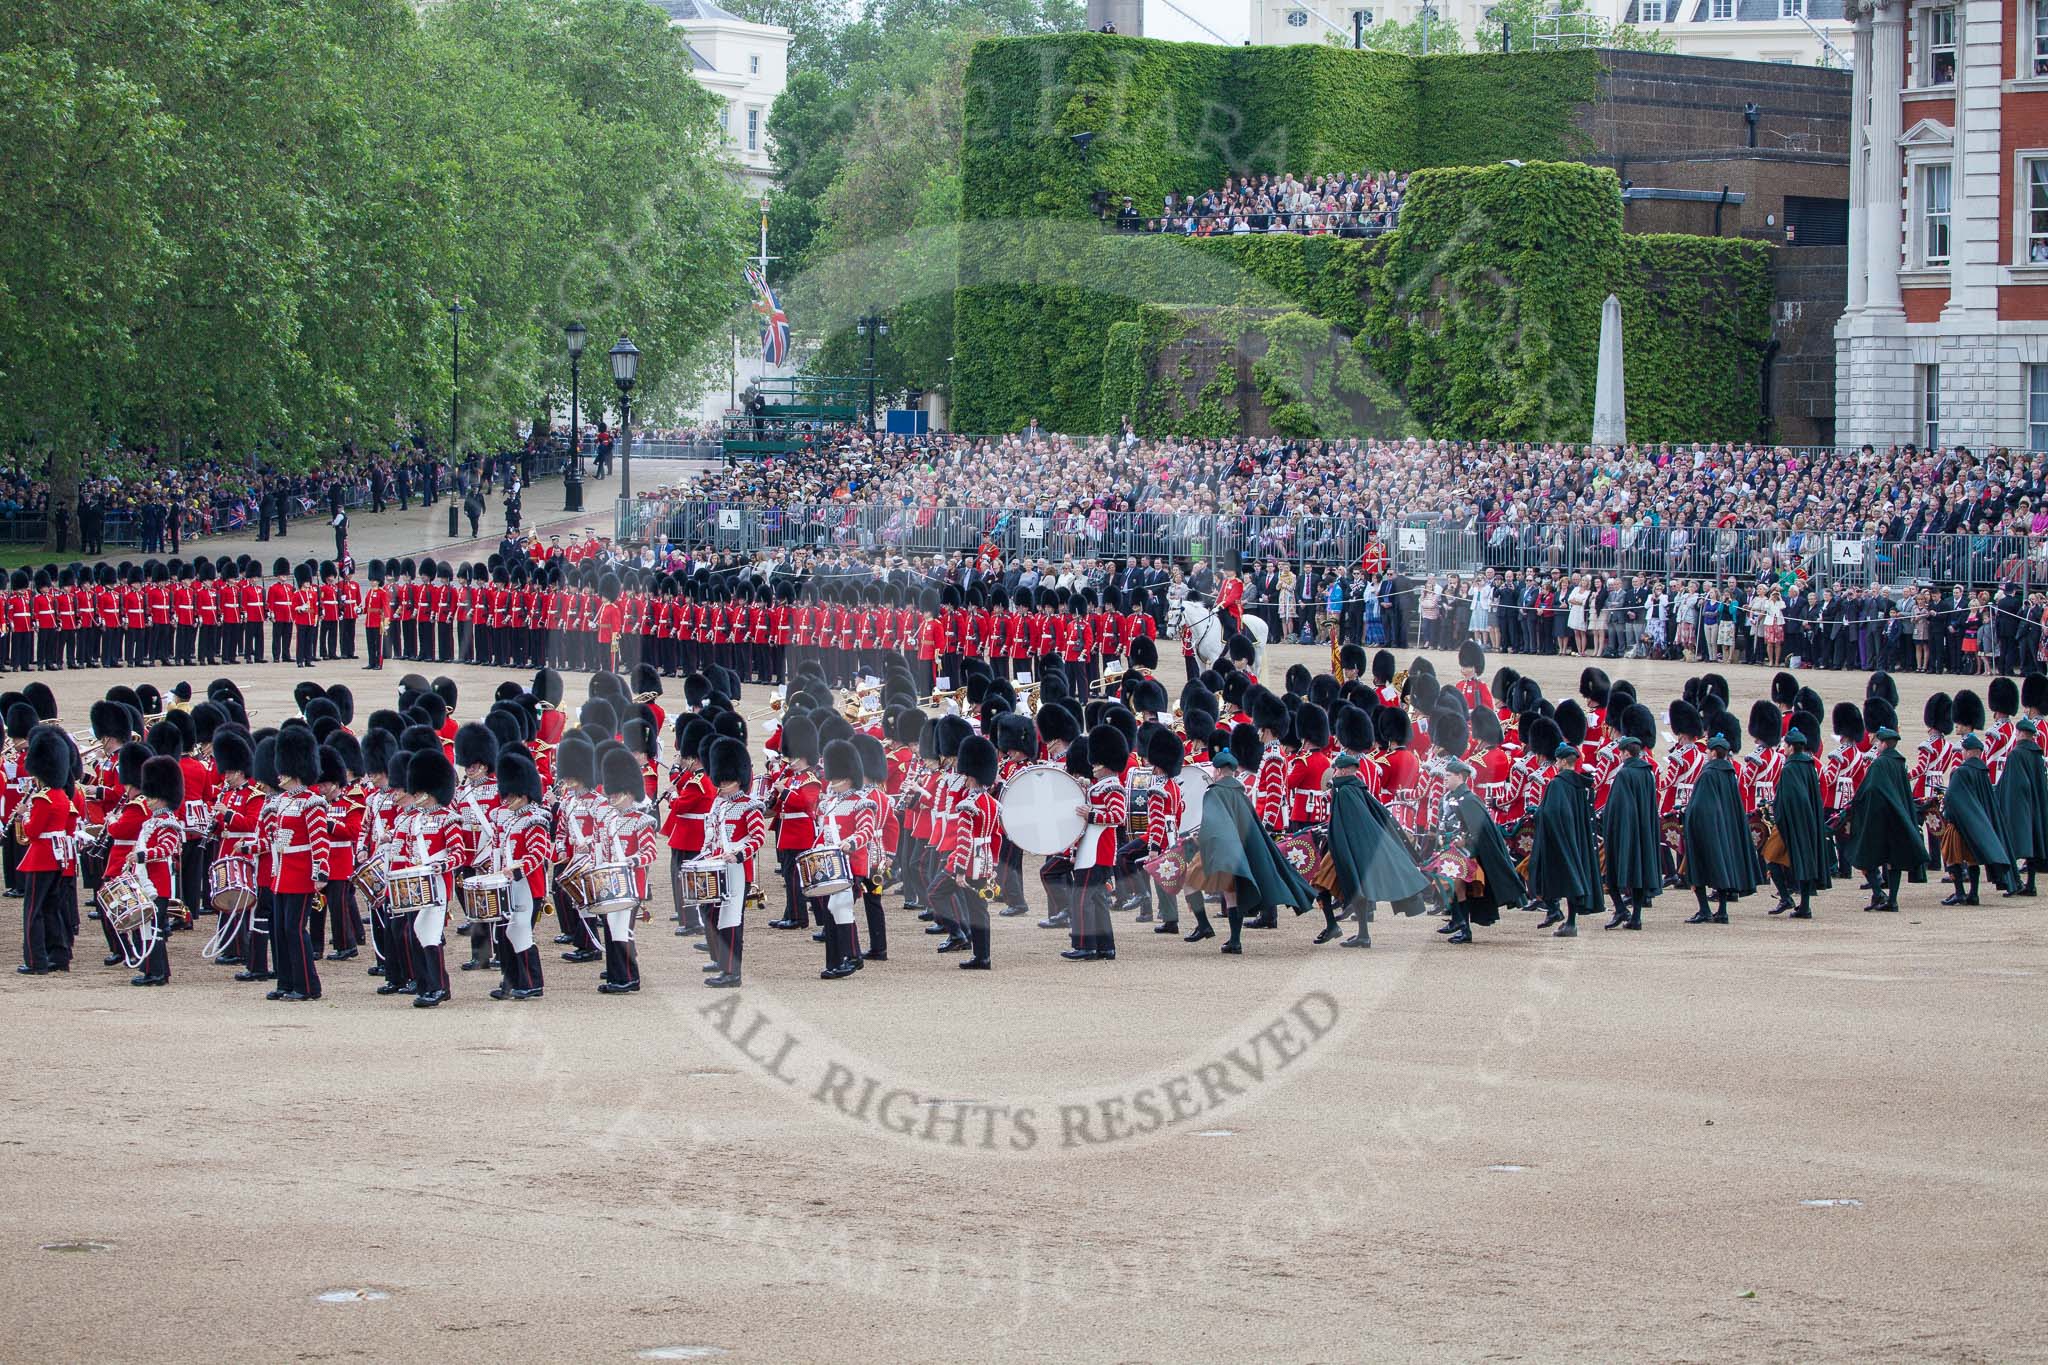 Trooping the Colour 2012: The Massed Bands Troop, before the Collection of the Colour..
Horse Guards Parade, Westminster,
London SW1,

United Kingdom,
on 16 June 2012 at 11:18, image #294